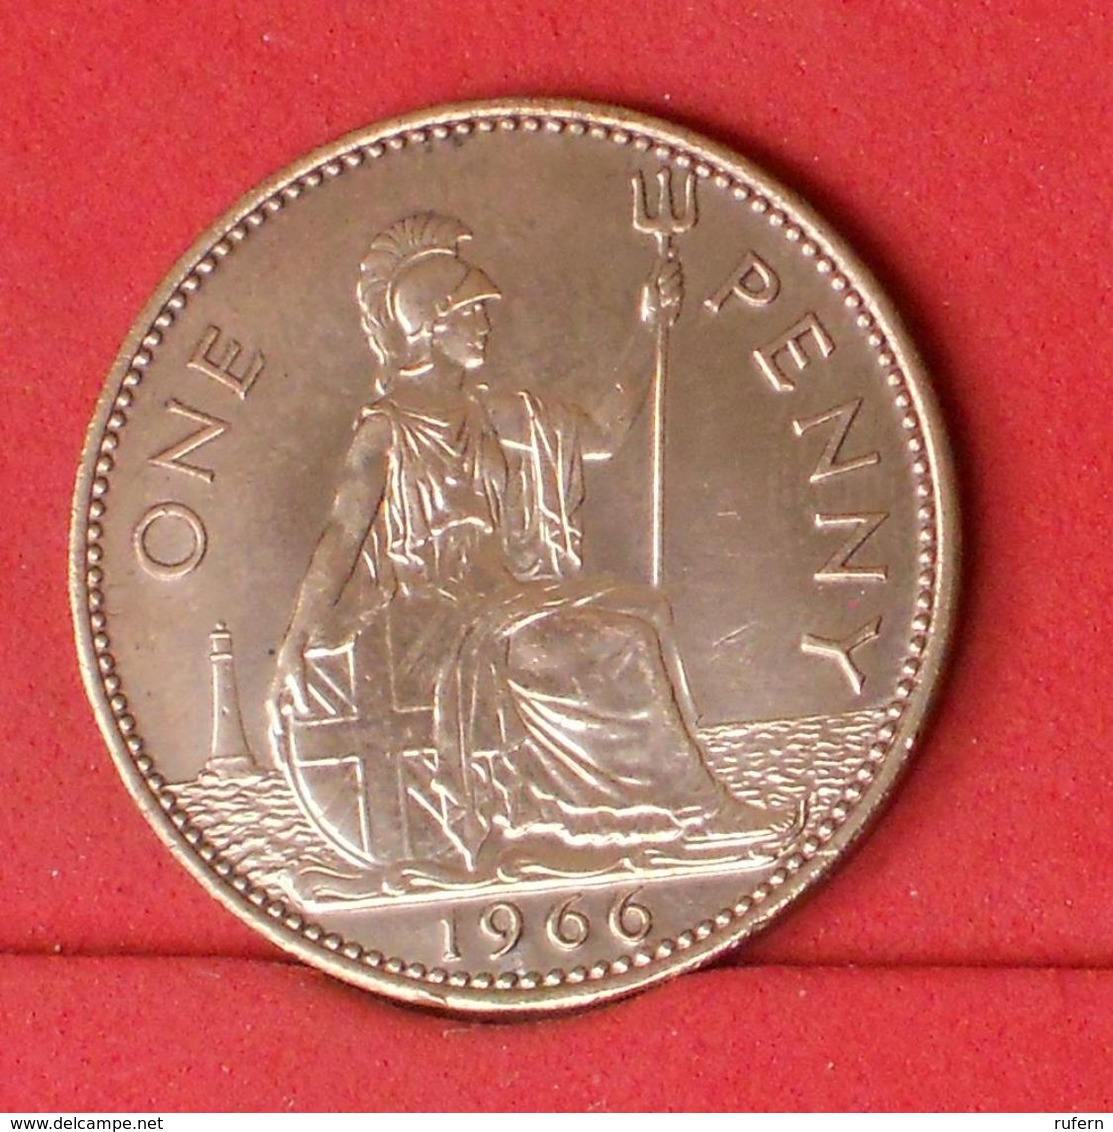 GREAT BRITAIN 1 PENNY 1966 -    KM# 897 - (Nº19934) - D. 1 Penny